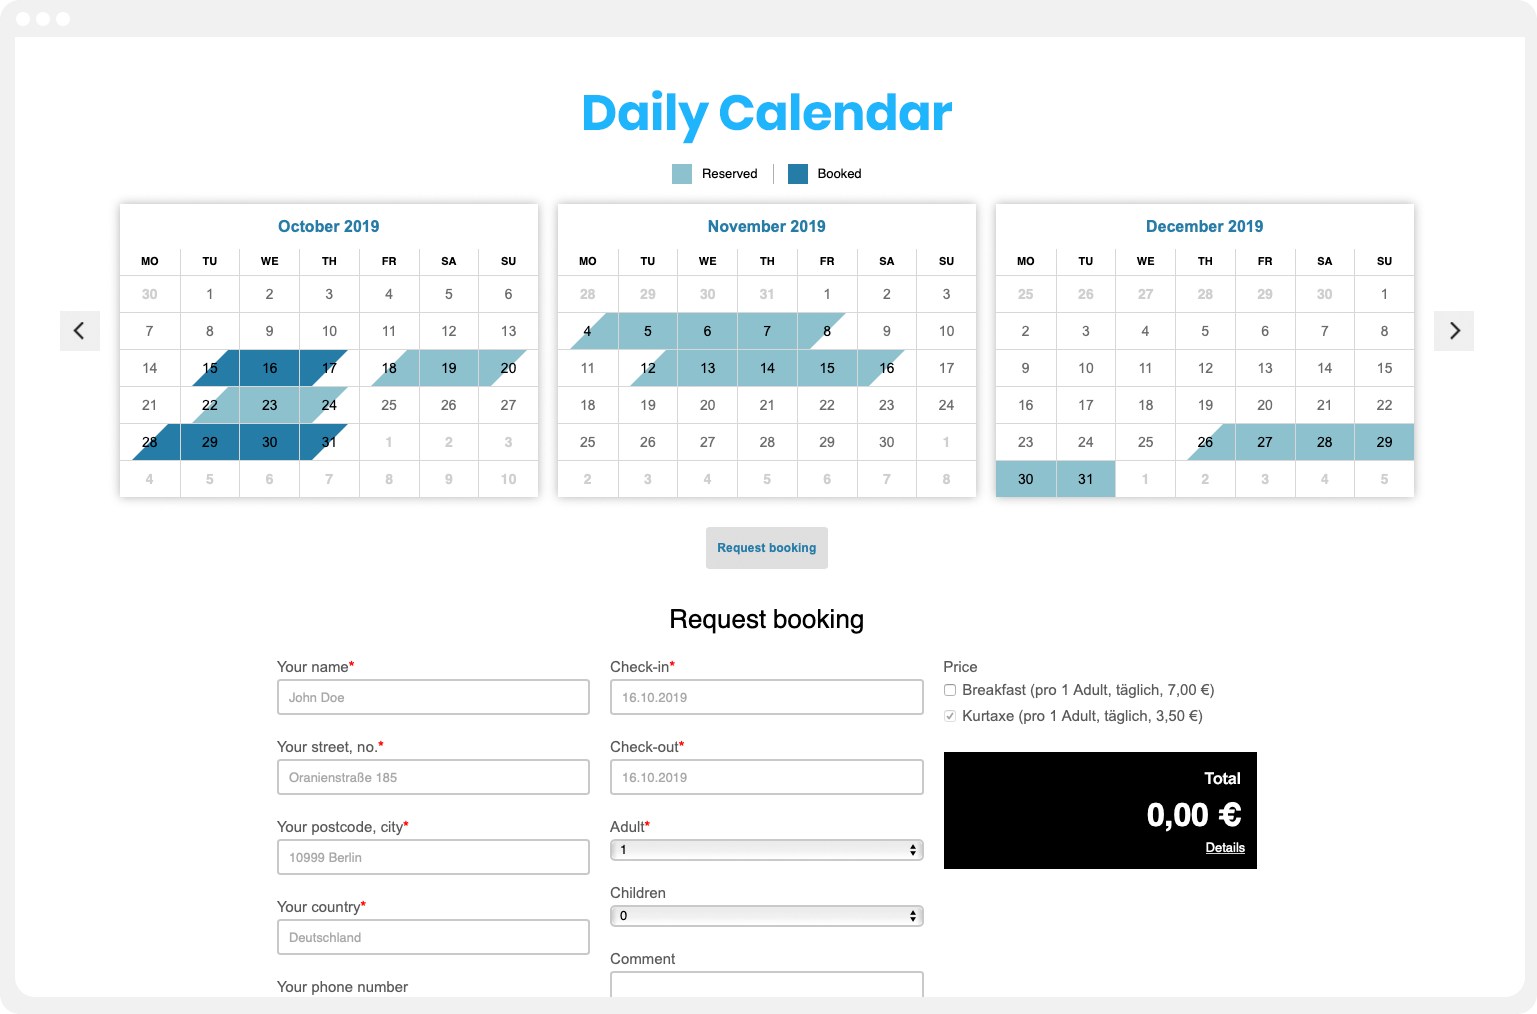 CalendarApp The Daily Booking Schedule